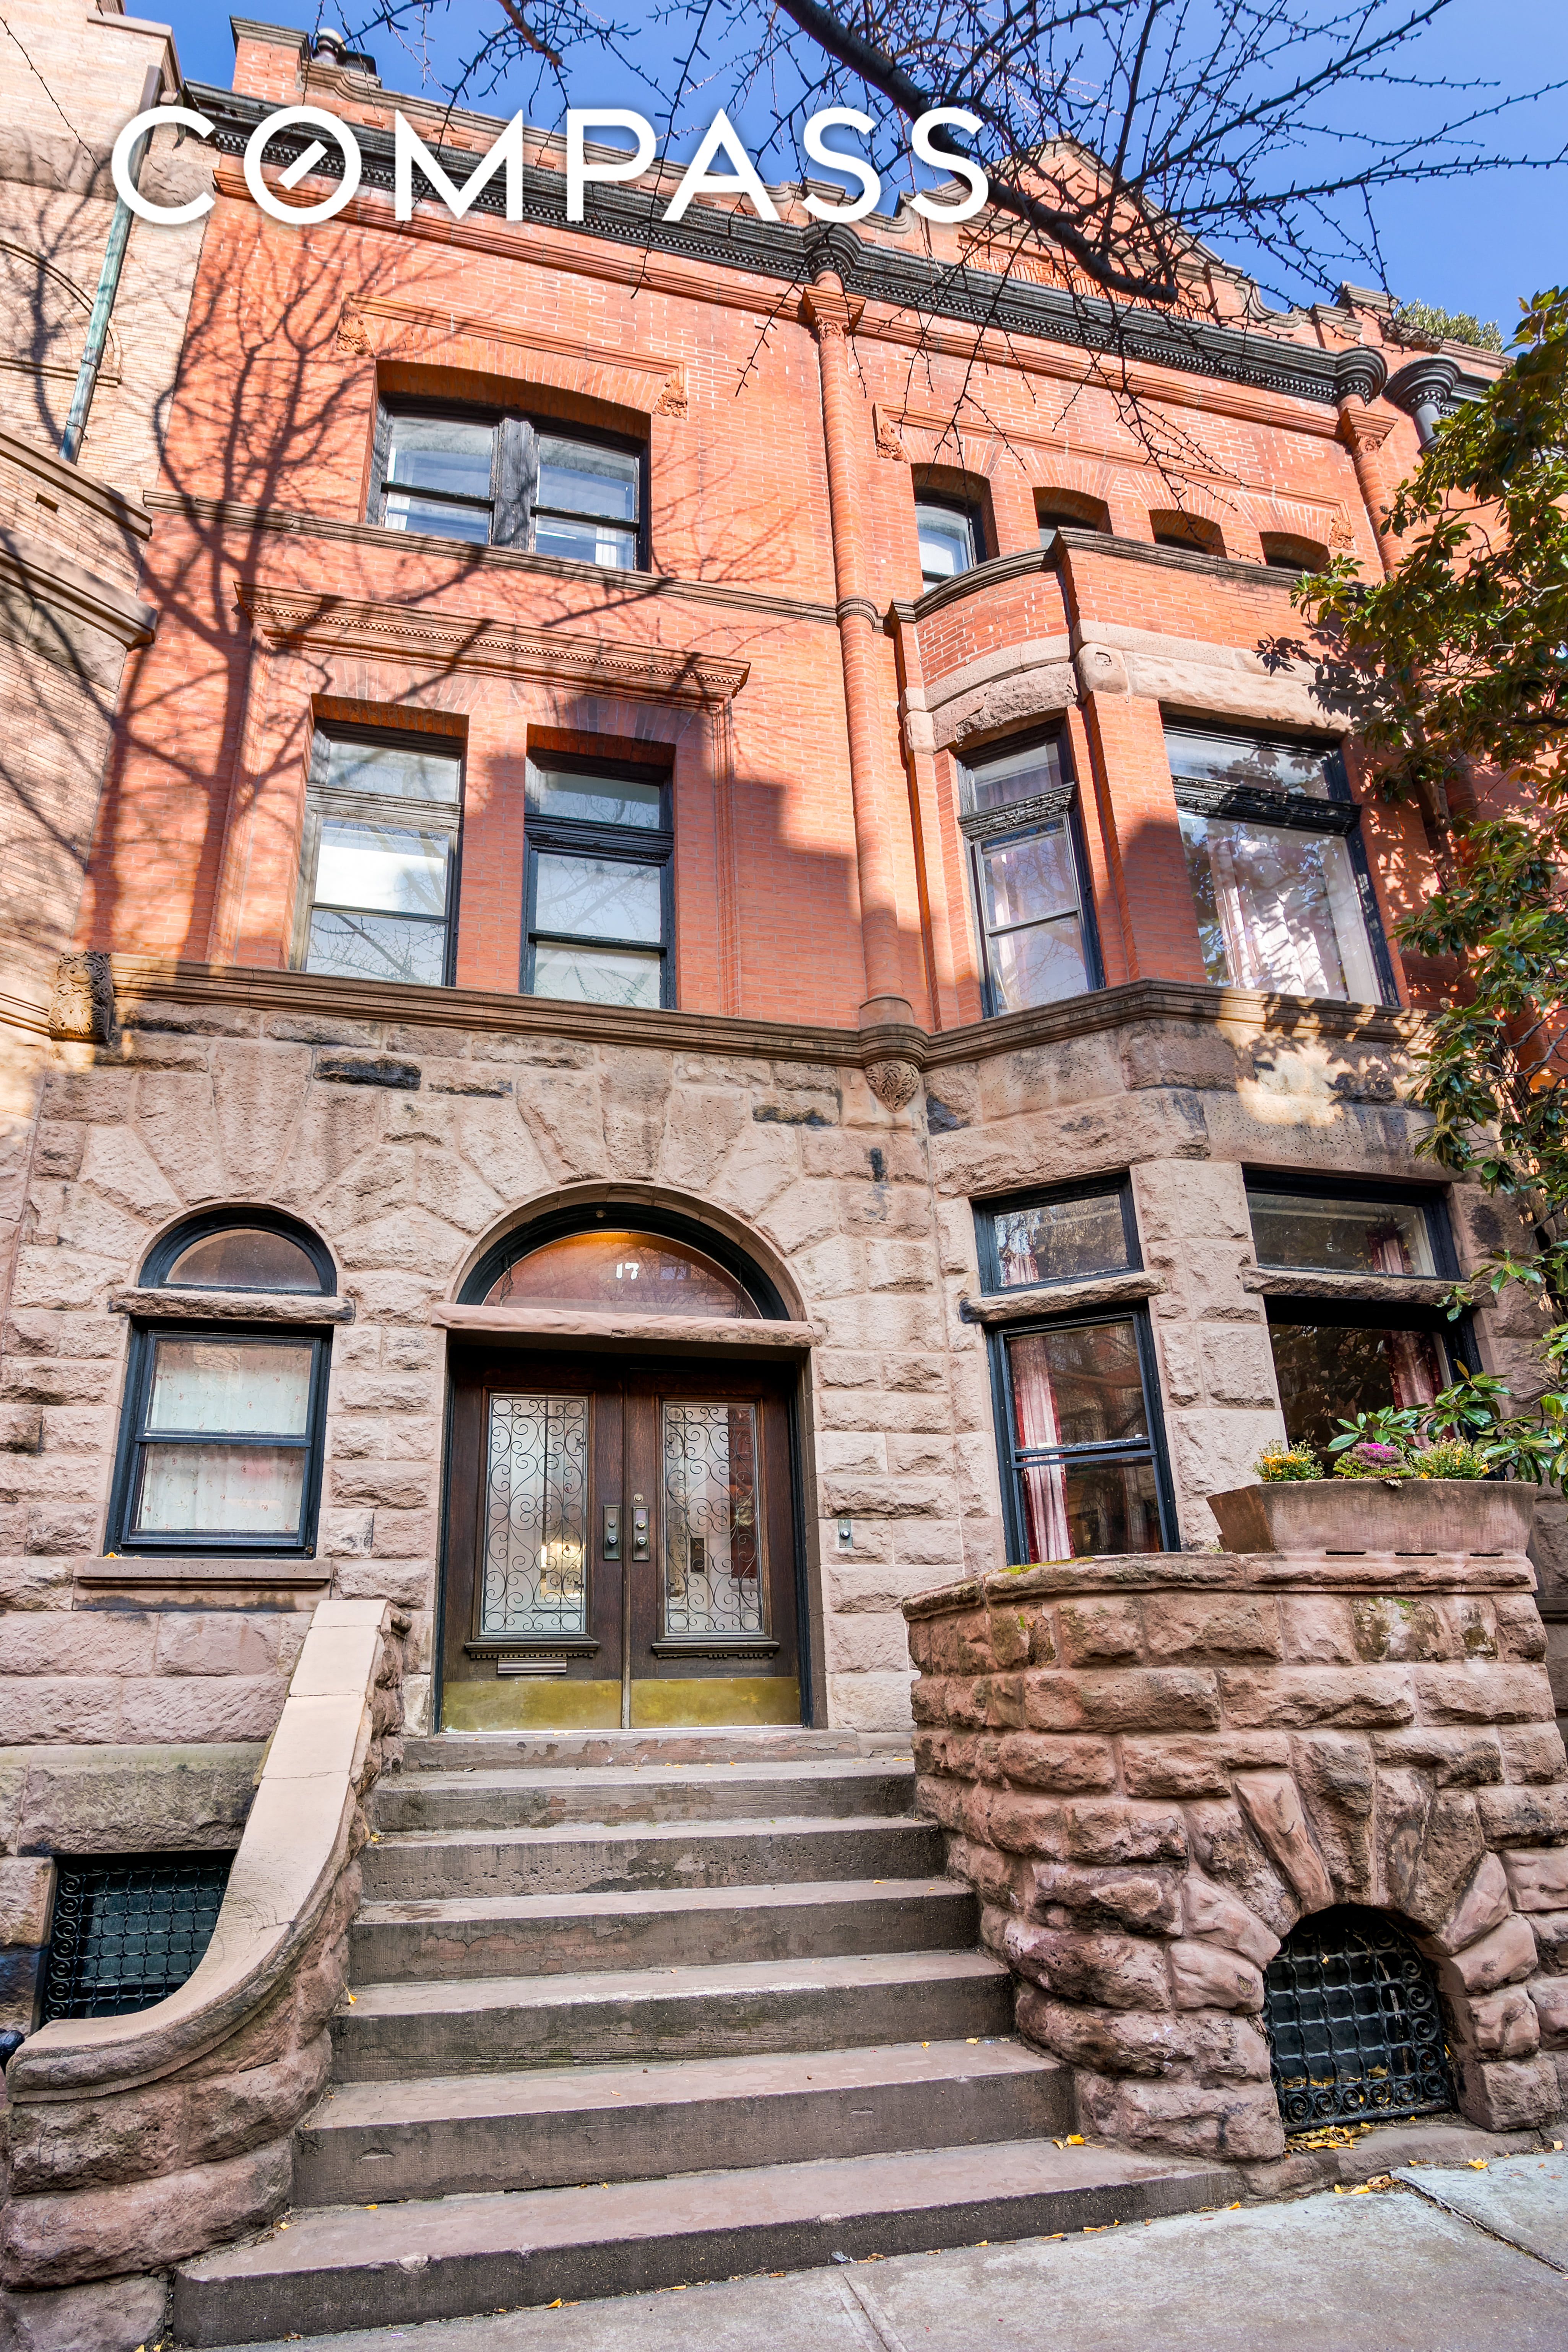 17 Montgomery Place, Park Slope, Brooklyn, New York - 8 Bedrooms  
4.5 Bathrooms  
21 Rooms - 